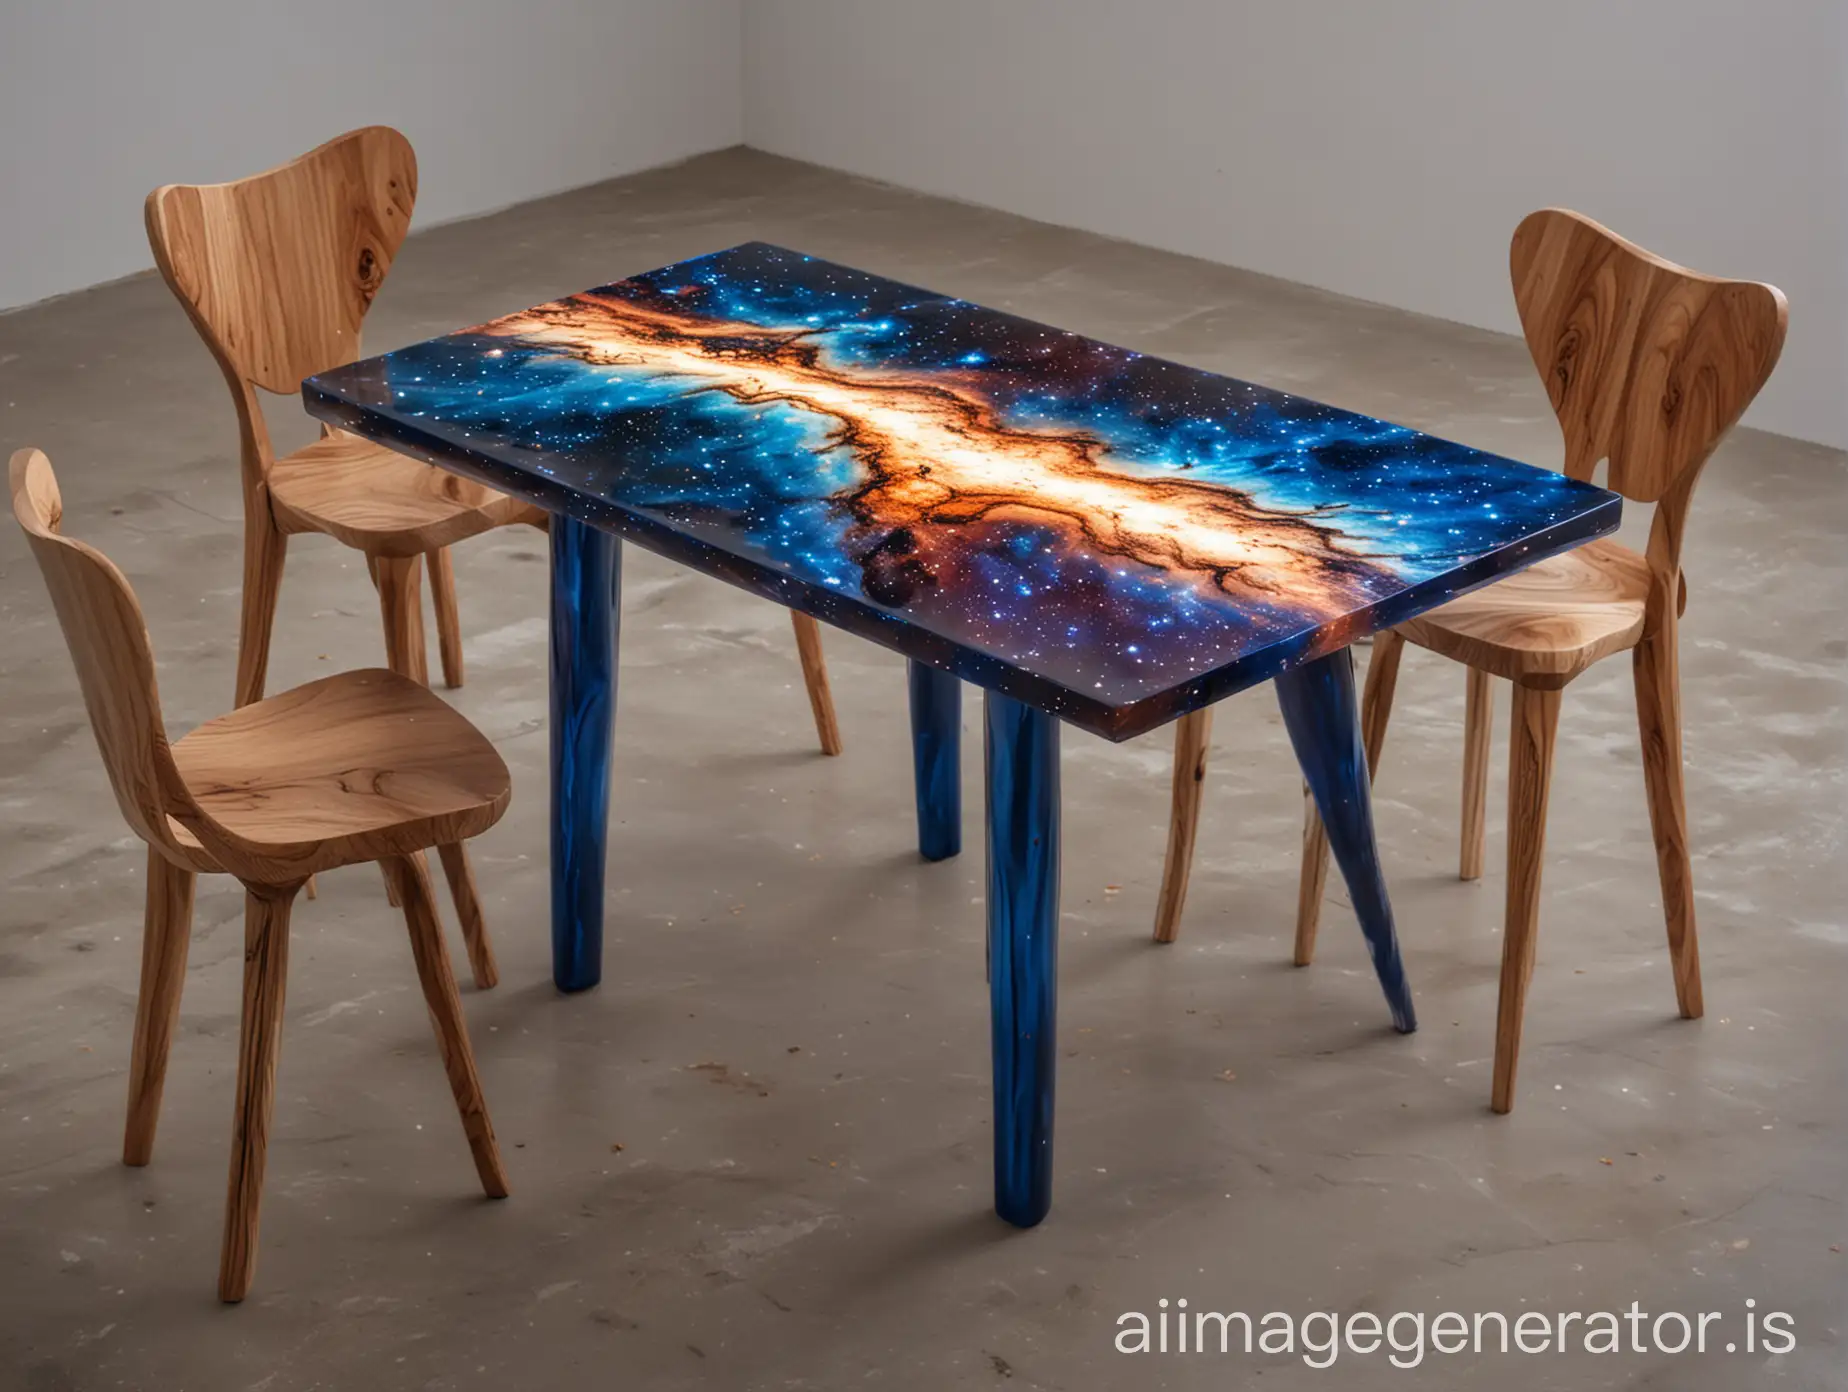 Modern-Rectangular-Wood-and-Epoxy-Resin-Table-with-Matching-Chairs-in-Galaxyinspired-Setting